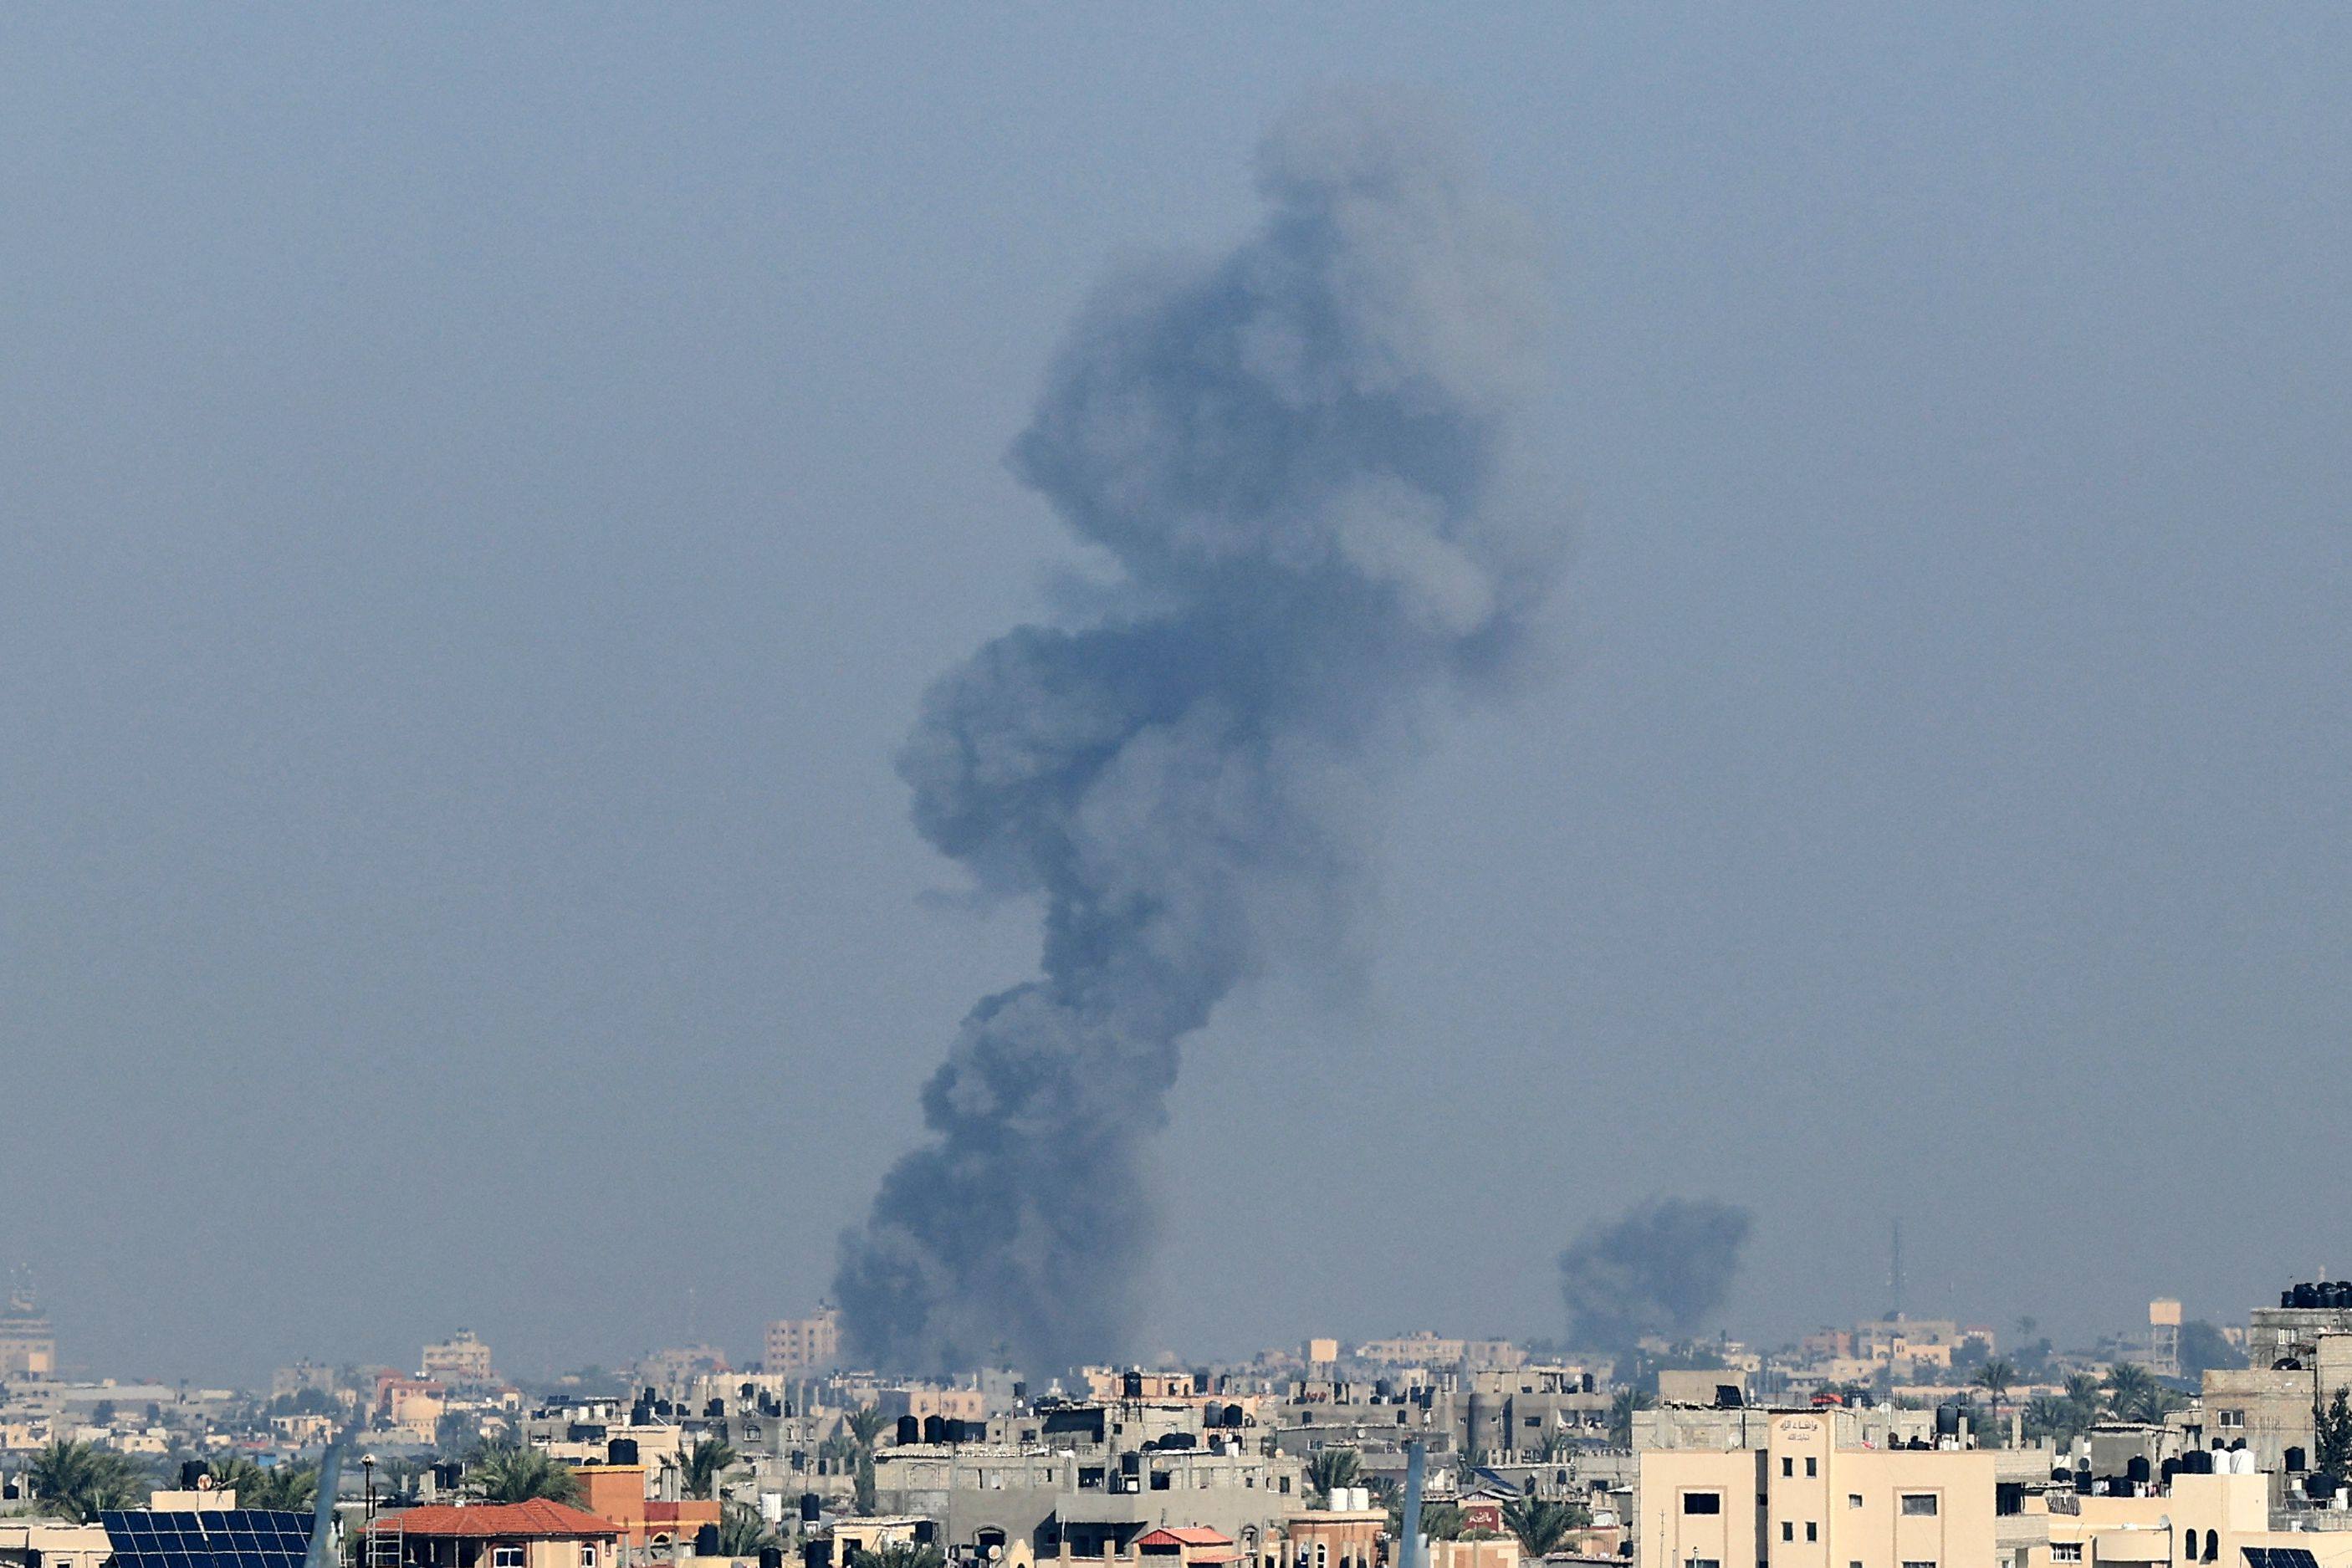 Smoke rises above buildings during Israeli strikes on Khan Yunis in the southern Gaza Strip, after battles resumed between Israel and Hamas militants, on Saturday. Photo: AFP